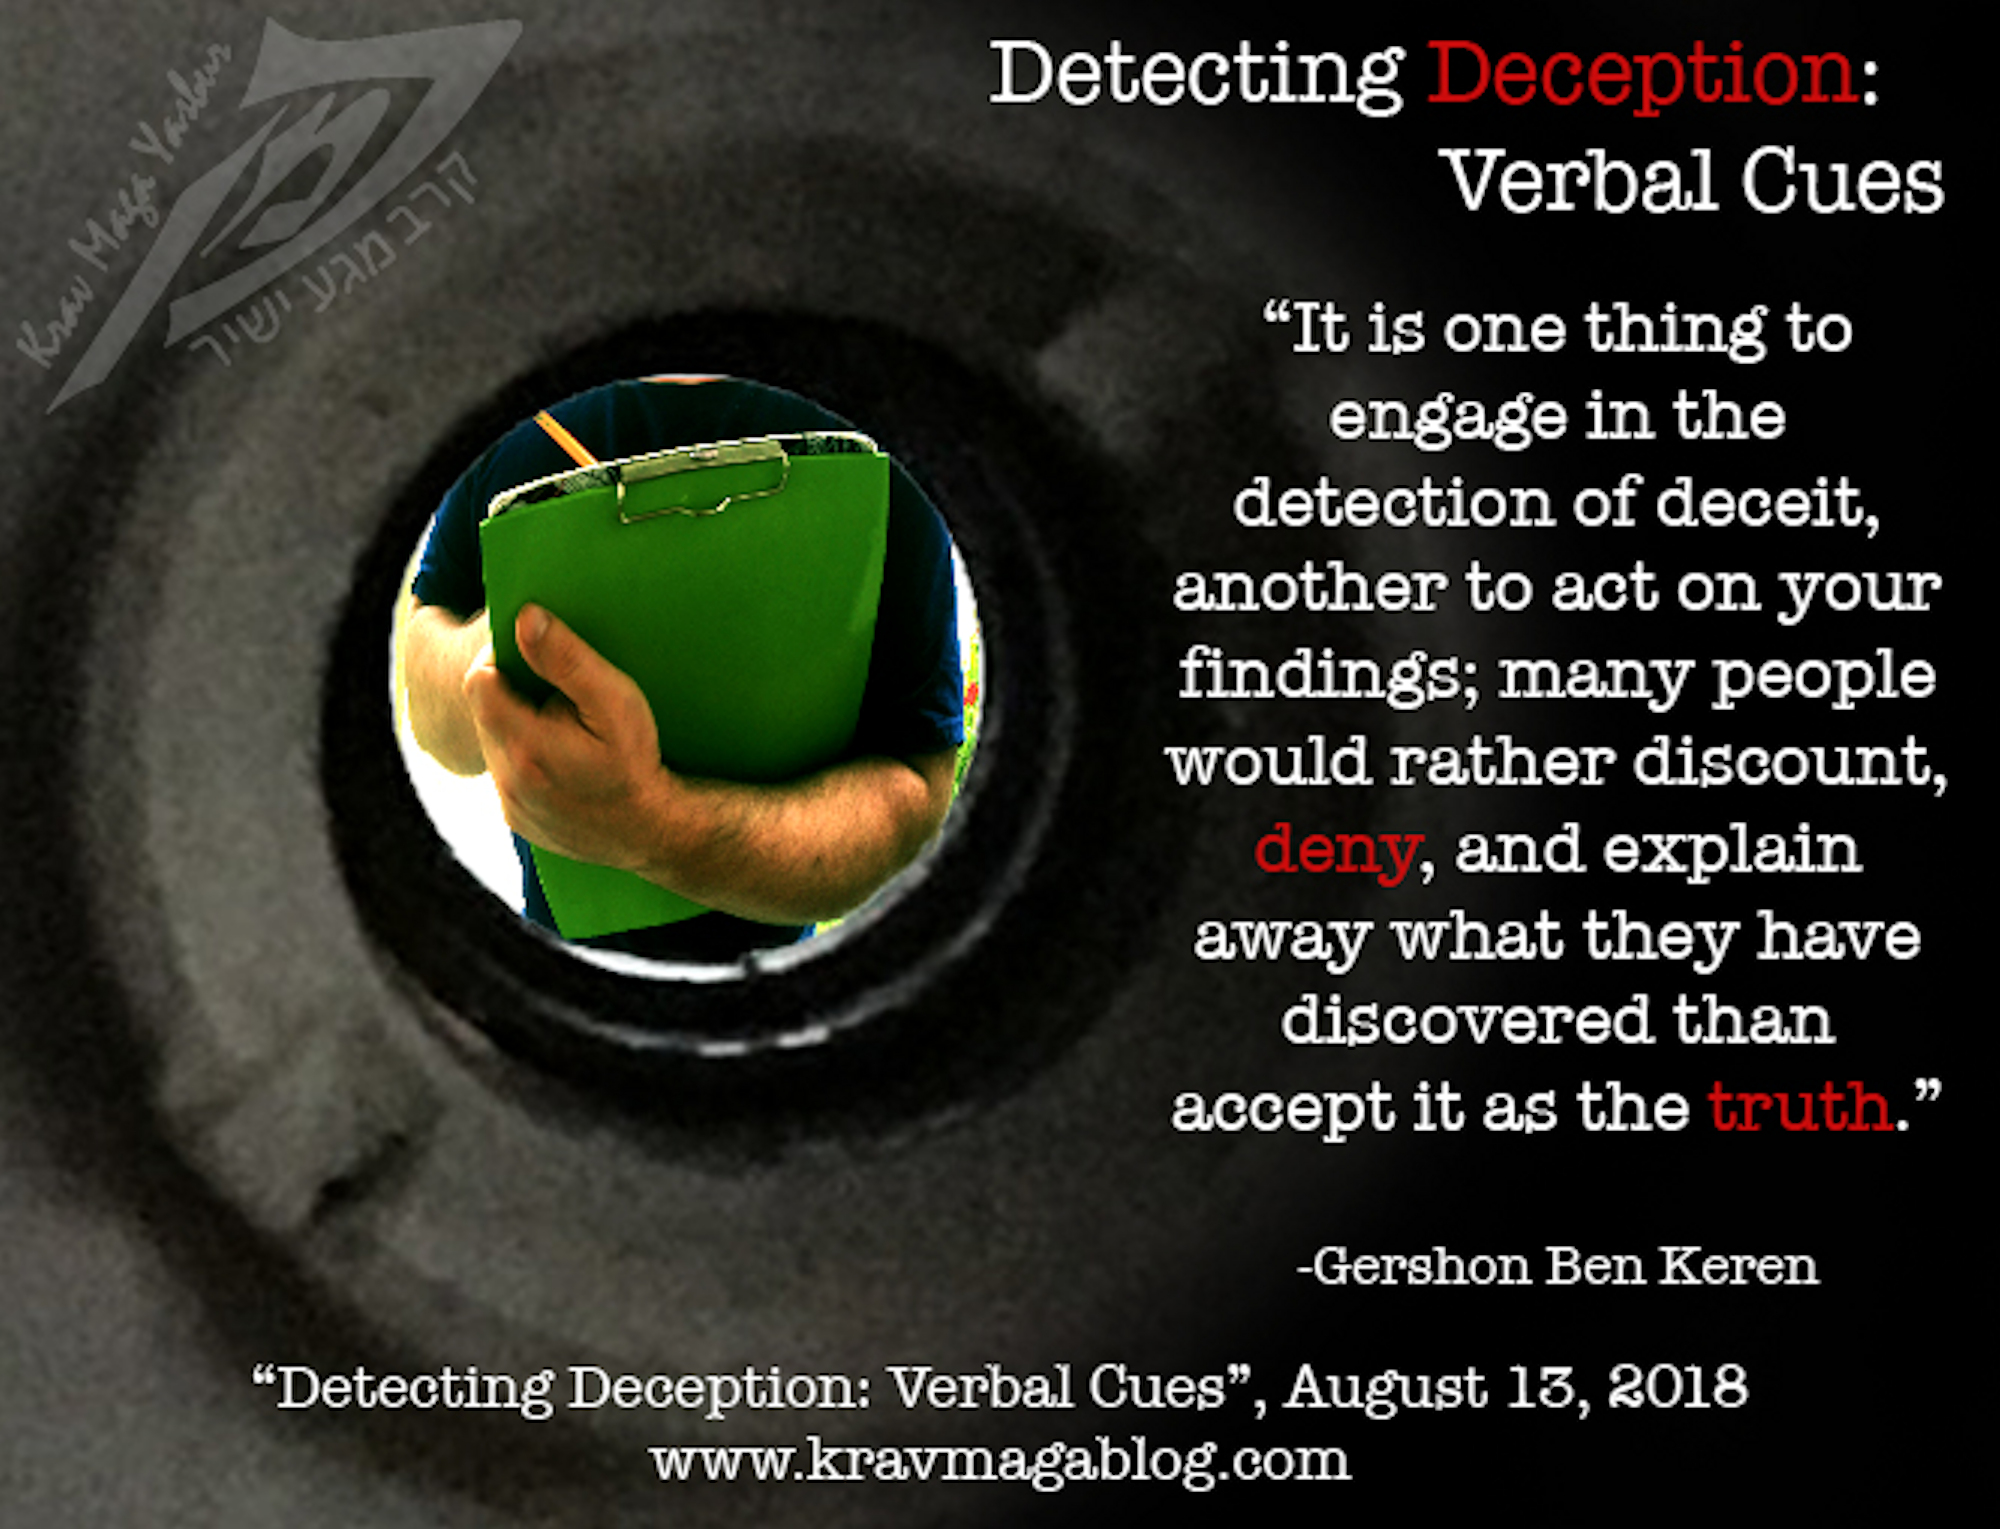 Blog About Detecting Deception: Verbal Cues